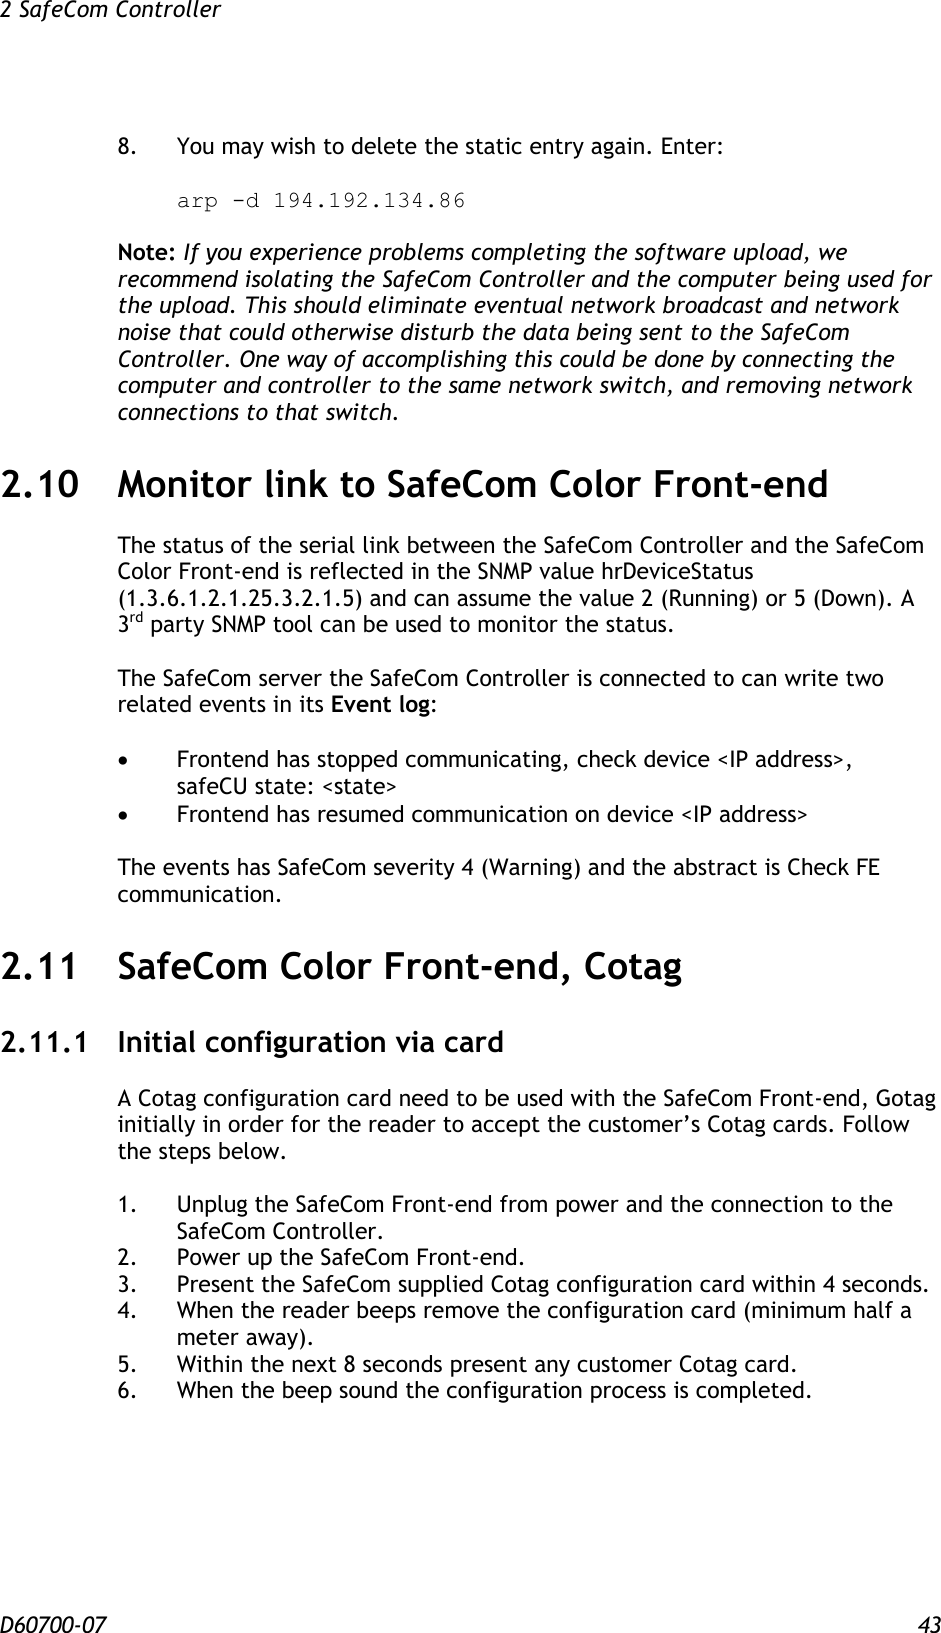 2 SafeCom Controller  D60700-07 43  8.  You may wish to delete the static entry again. Enter:   arp -d 194.192.134.86  Note: If you experience problems completing the software upload, we recommend isolating the SafeCom Controller and the computer being used for the upload. This should eliminate eventual network broadcast and network noise that could otherwise disturb the data being sent to the SafeCom Controller. One way of accomplishing this could be done by connecting the computer and controller to the same network switch, and removing network connections to that switch. 2.10 Monitor link to SafeCom Color Front-end The status of the serial link between the SafeCom Controller and the SafeCom Color Front-end is reflected in the SNMP value hrDeviceStatus (1.3.6.1.2.1.25.3.2.1.5) and can assume the value 2 (Running) or 5 (Down). A 3rd party SNMP tool can be used to monitor the status.  The SafeCom server the SafeCom Controller is connected to can write two related events in its Event log:   Frontend has stopped communicating, check device &lt;IP address&gt;, safeCU state: &lt;state&gt;  Frontend has resumed communication on device &lt;IP address&gt;  The events has SafeCom severity 4 (Warning) and the abstract is Check FE communication. 2.11 SafeCom Color Front-end, Cotag 2.11.1 Initial configuration via card A Cotag configuration card need to be used with the SafeCom Front-end, Gotag initially in order for the reader to accept the customer’s Cotag cards. Follow the steps below.  1.  Unplug the SafeCom Front-end from power and the connection to the SafeCom Controller.  2.  Power up the SafeCom Front-end.  3.  Present the SafeCom supplied Cotag configuration card within 4 seconds.  4.  When the reader beeps remove the configuration card (minimum half a meter away).  5.  Within the next 8 seconds present any customer Cotag card.  6.  When the beep sound the configuration process is completed. 